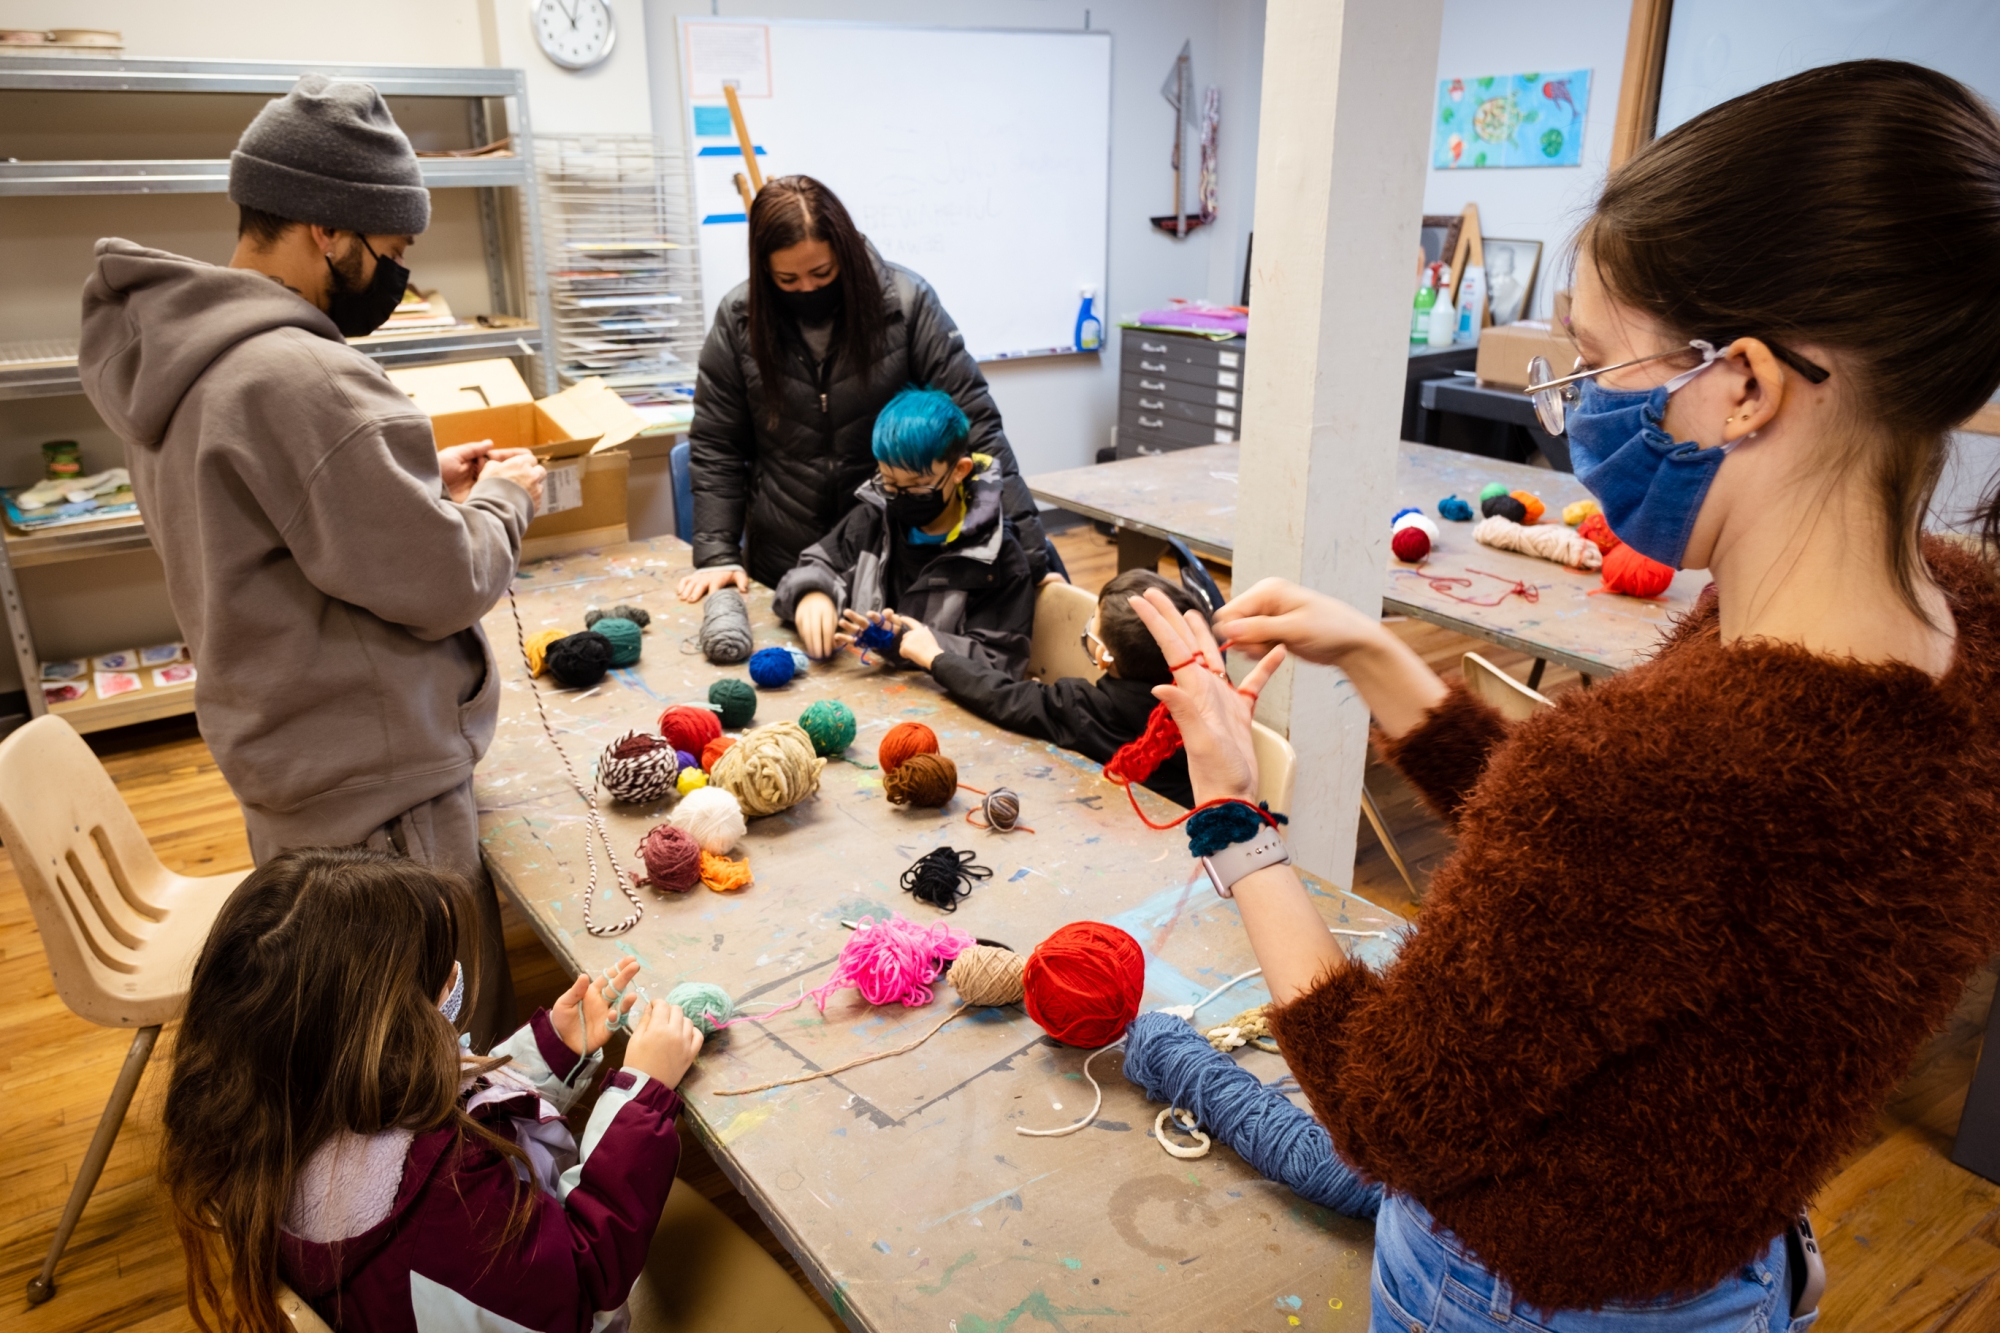 LUX Art Scholars For Named LUX Center For The Arts Art Gallery Classes Summer Camps